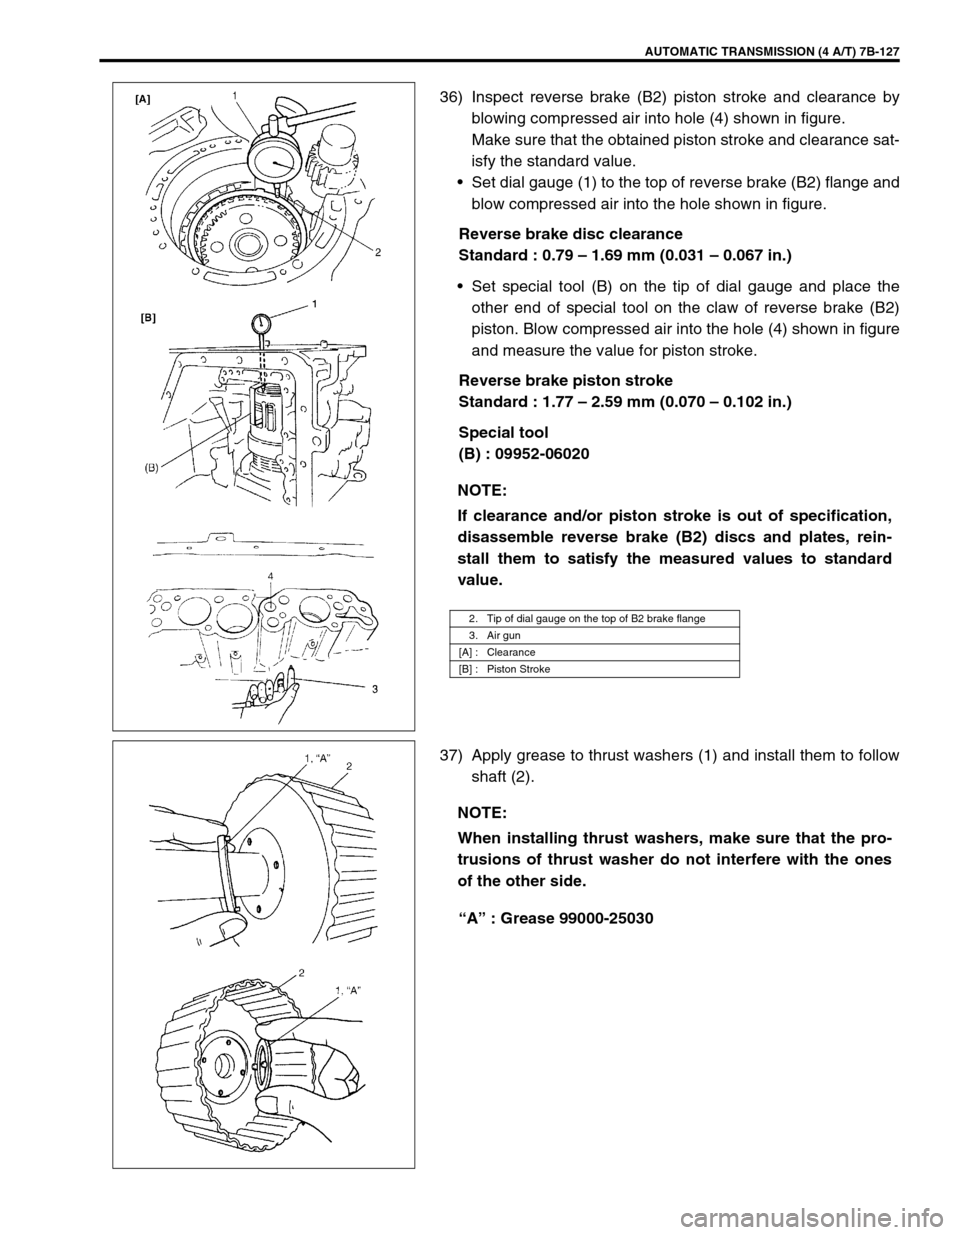 SUZUKI SWIFT 2000 1.G Transmission Service Workshop Manual AUTOMATIC TRANSMISSION (4 A/T) 7B-127
36) Inspect reverse brake (B2) piston stroke and clearance by
blowing compressed air into hole (4) shown in figure.
Make sure that the obtained piston stroke and 